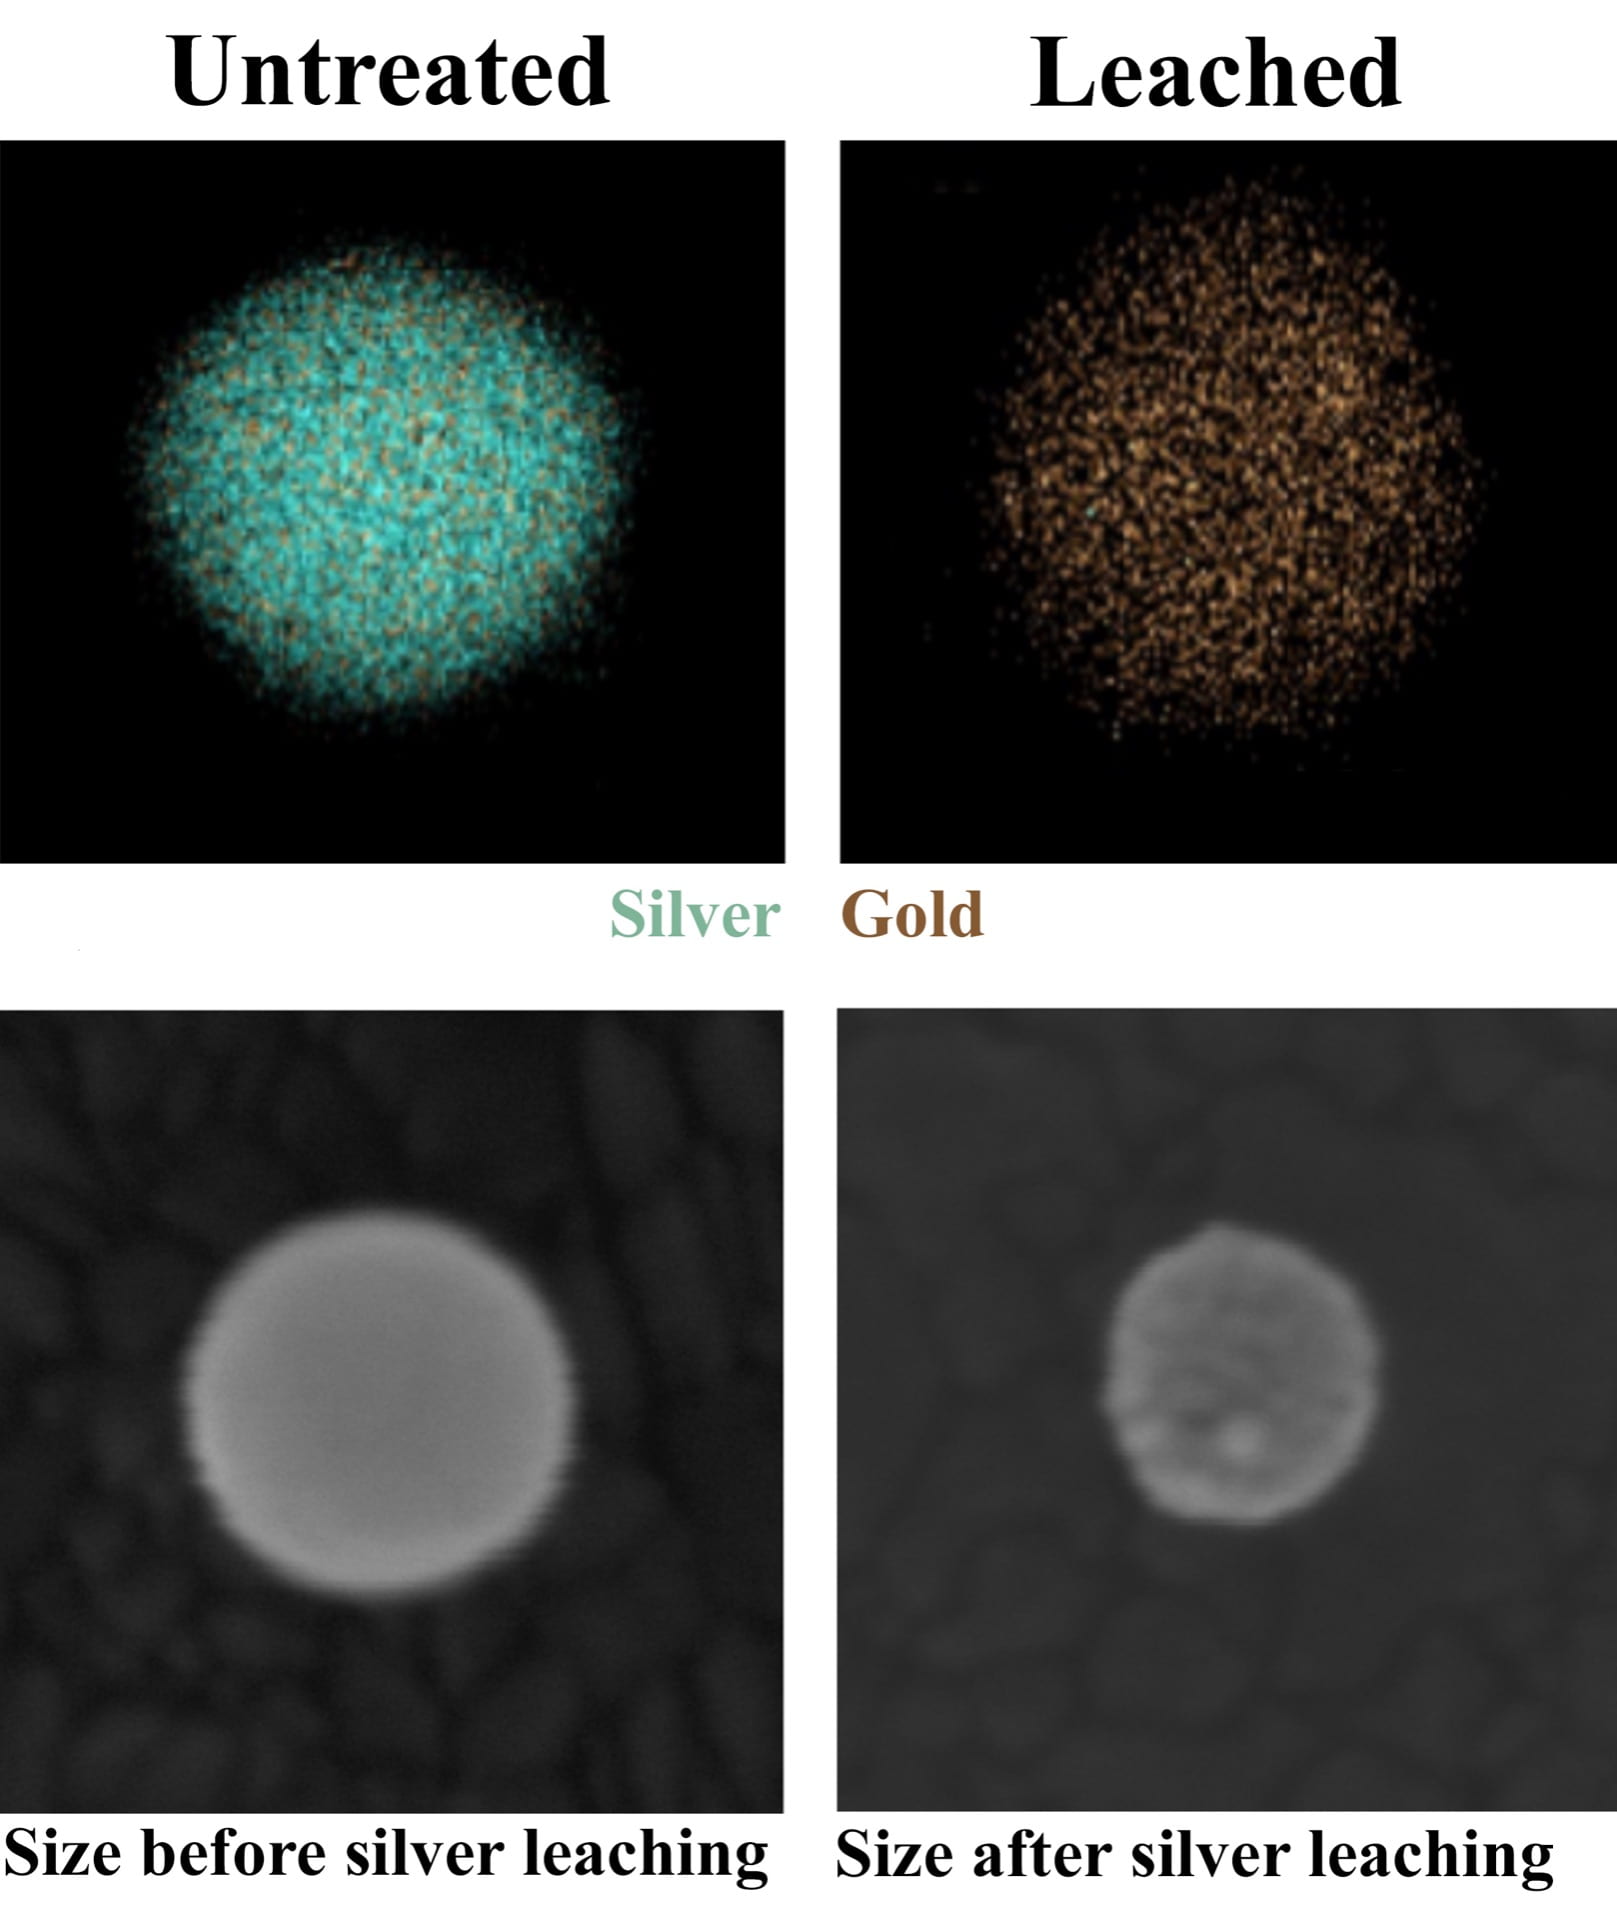 silver ions from gold-silver nanoparticle